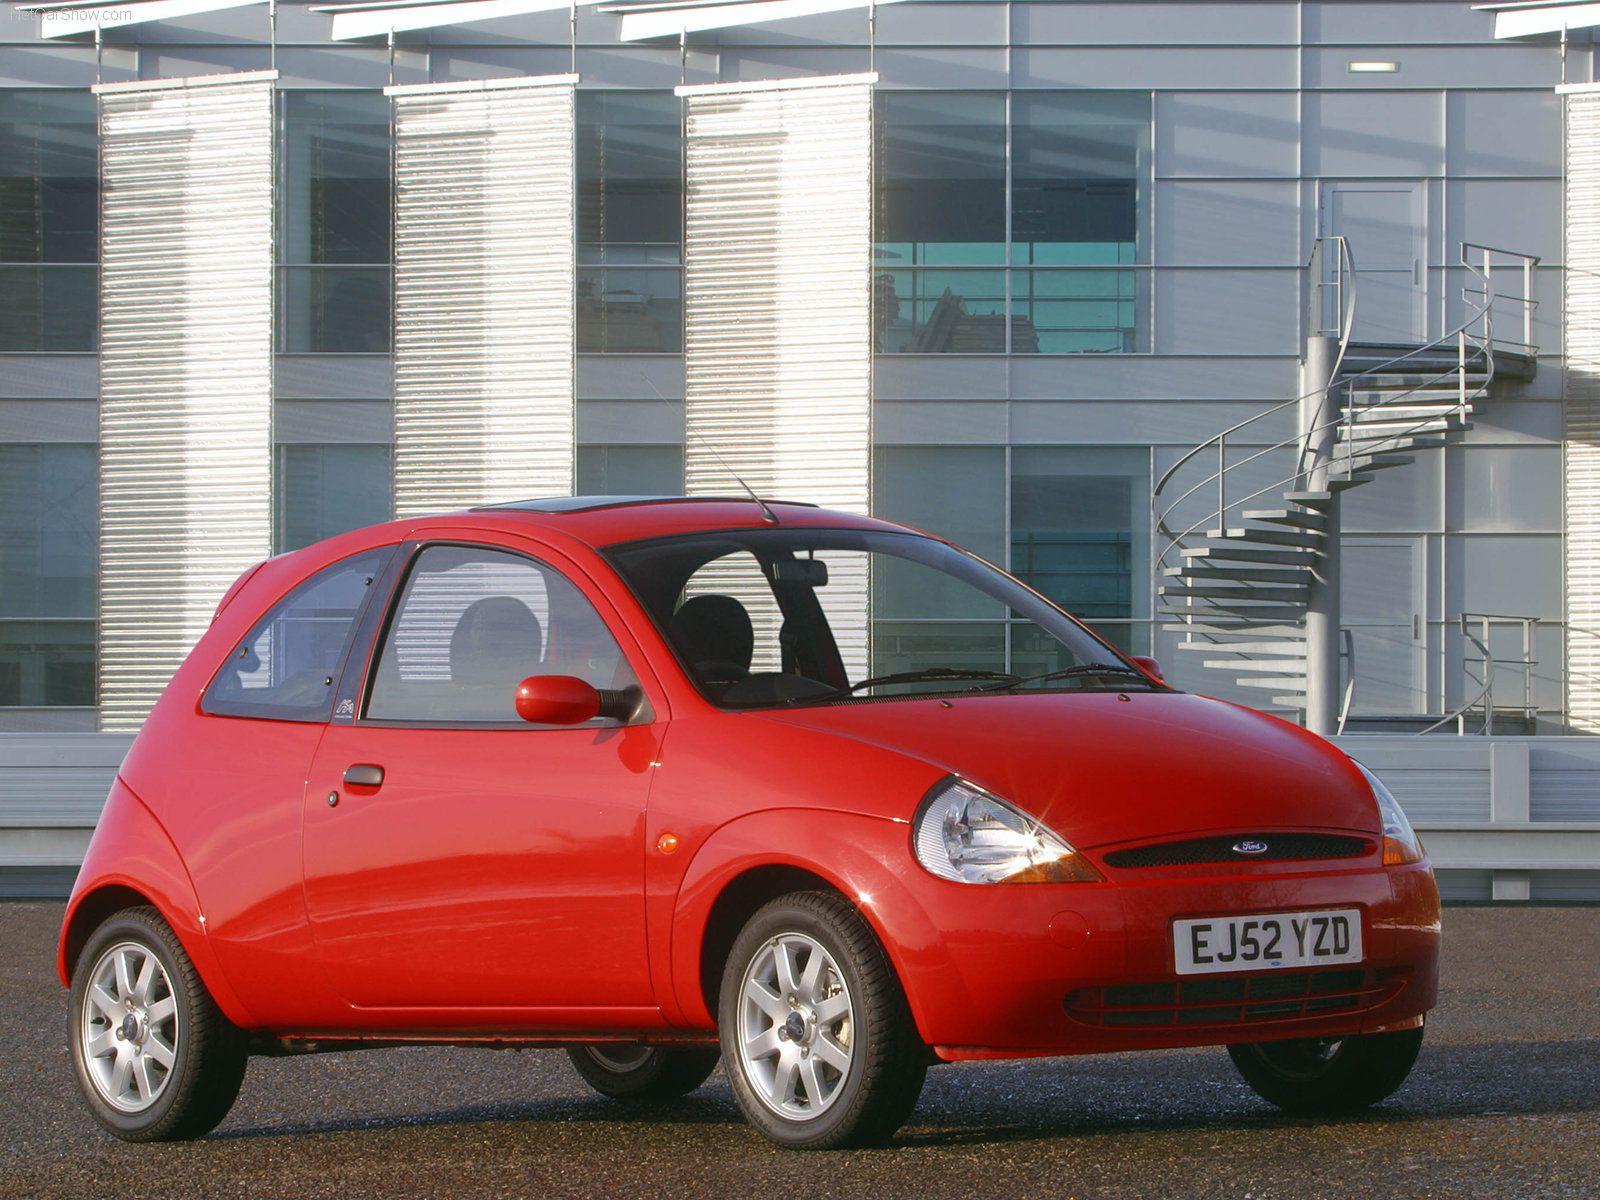 Ford KA picture # 33345. Ford photo gallery